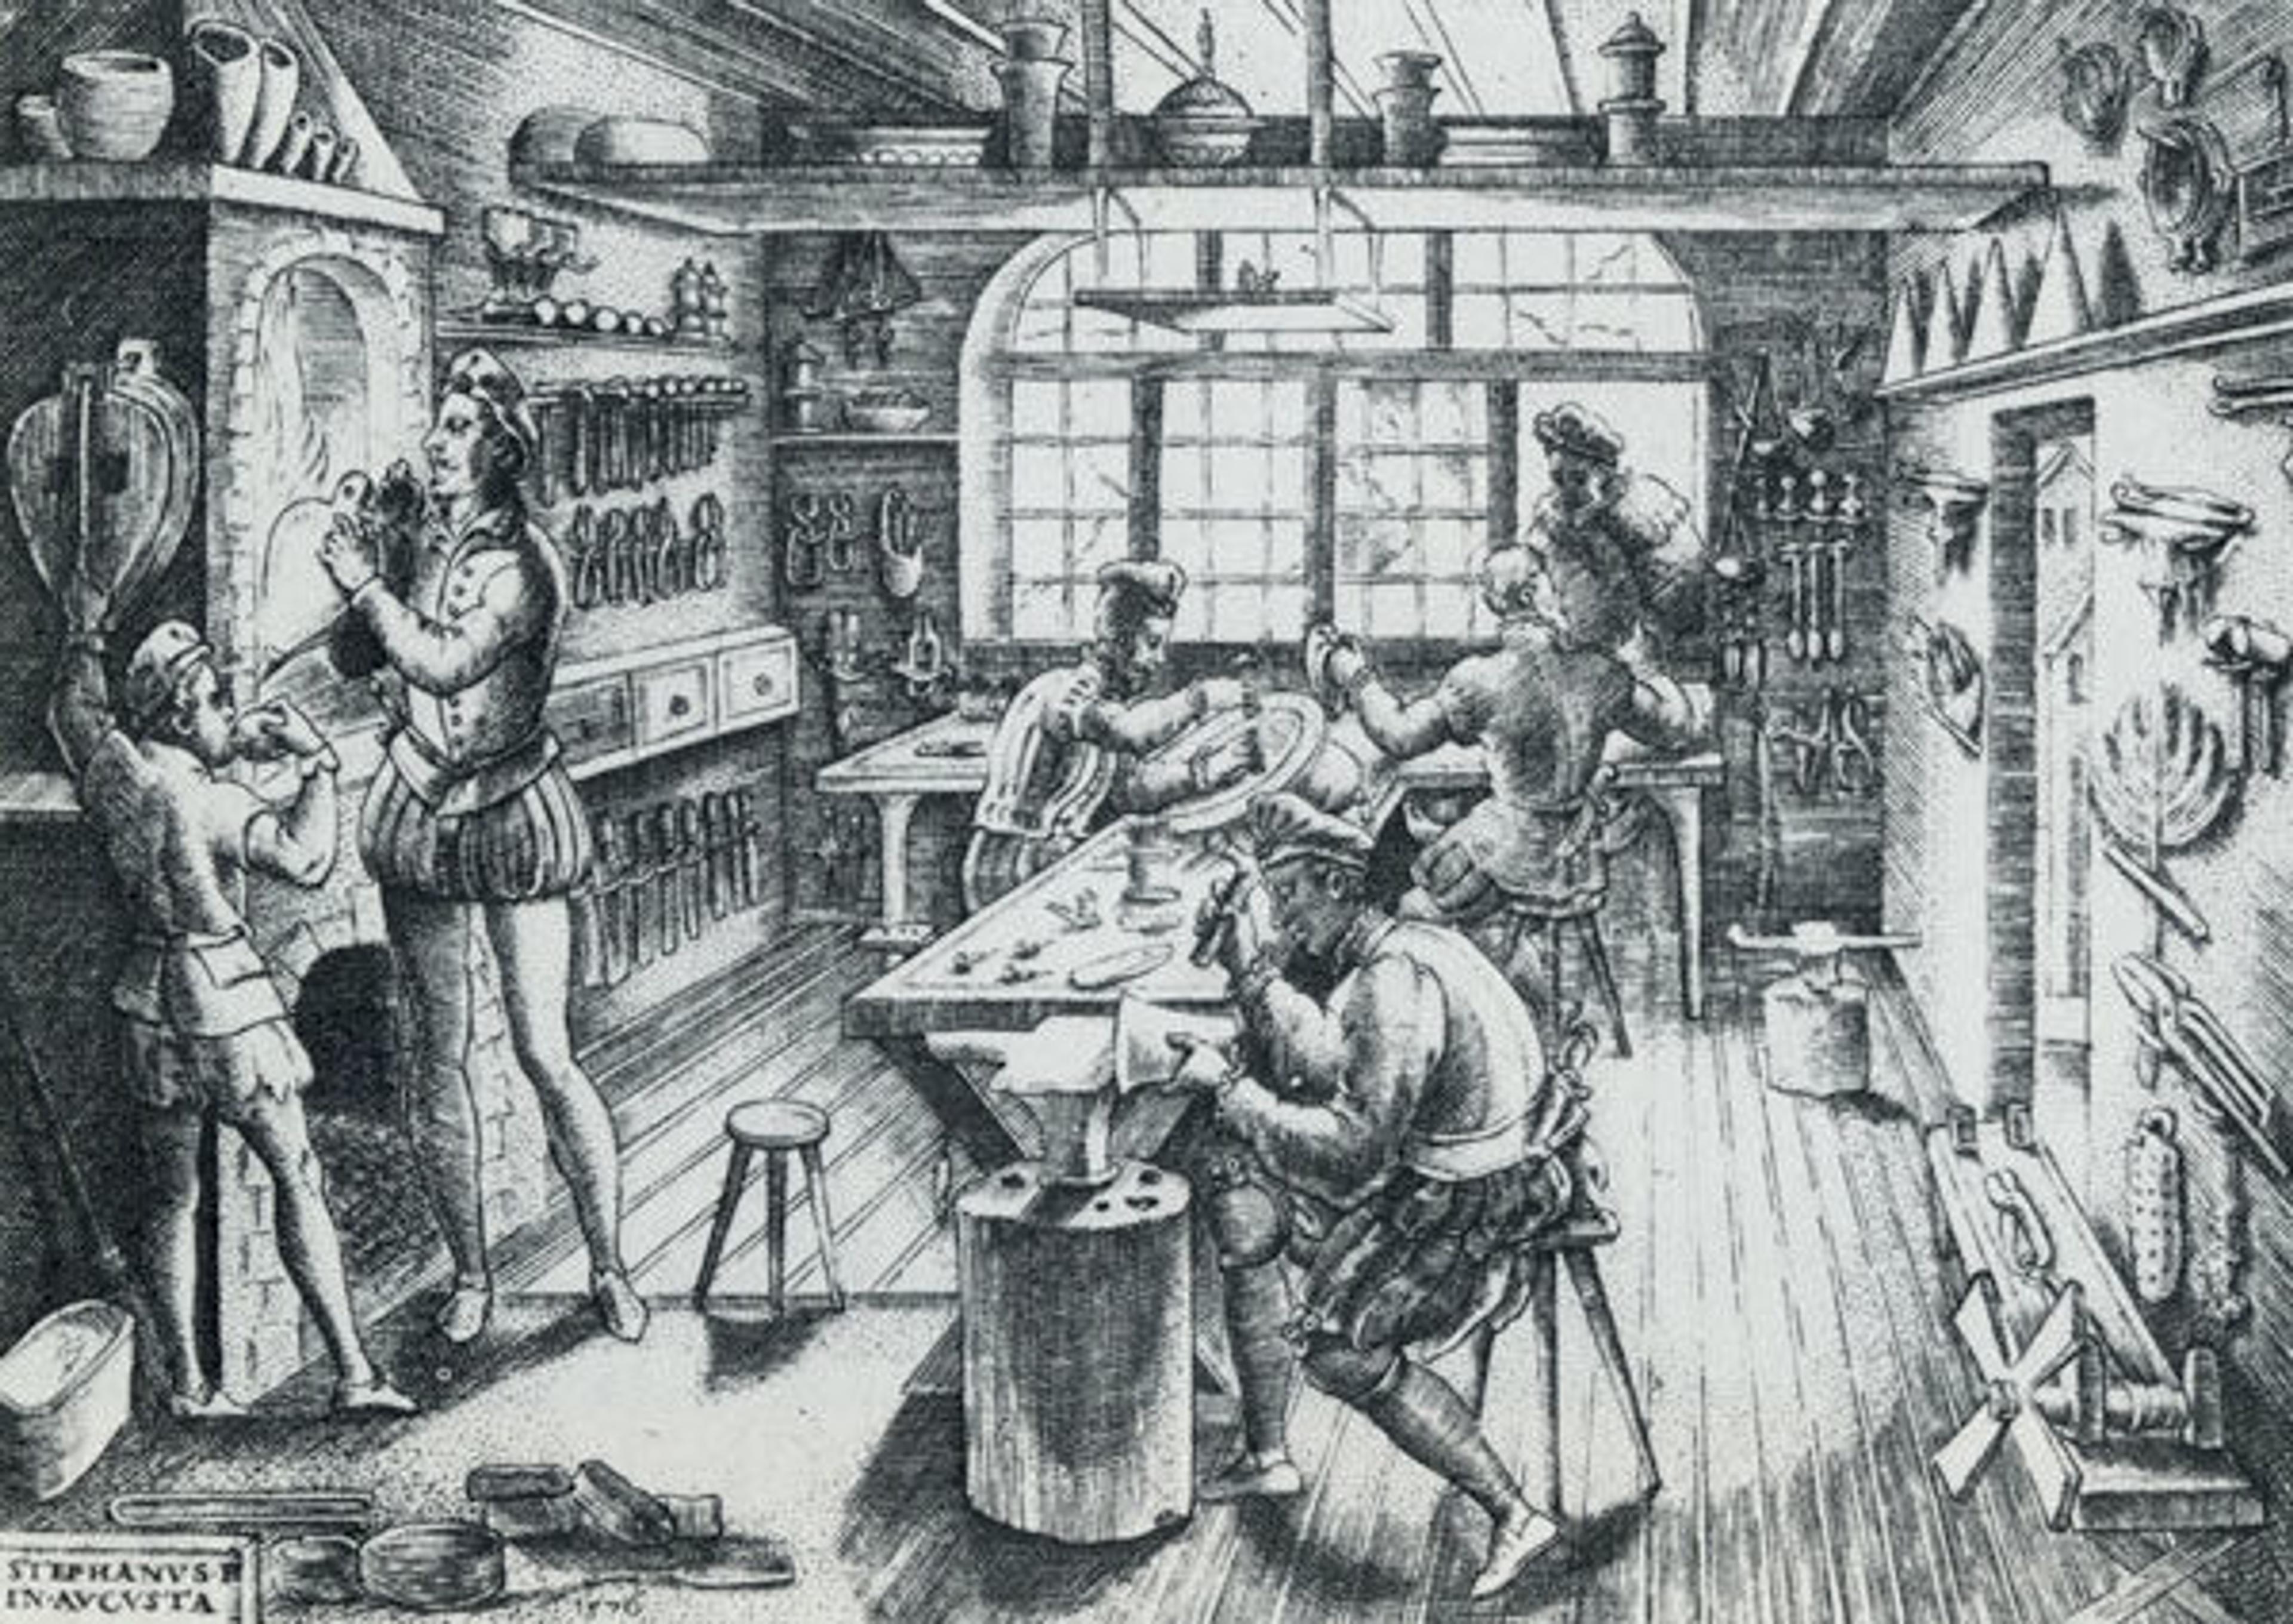 Engraving by Éttienne Delaune (1518–1583) of a goldsmith's workshop in Augsburg, Germany, 1576. From John F. Hayward, Virtuoso Goldsmiths and the Triumph of Mannerism, 1540–1620 (London: Sotheby Parke Bernet Publications, 1976), plate 3.